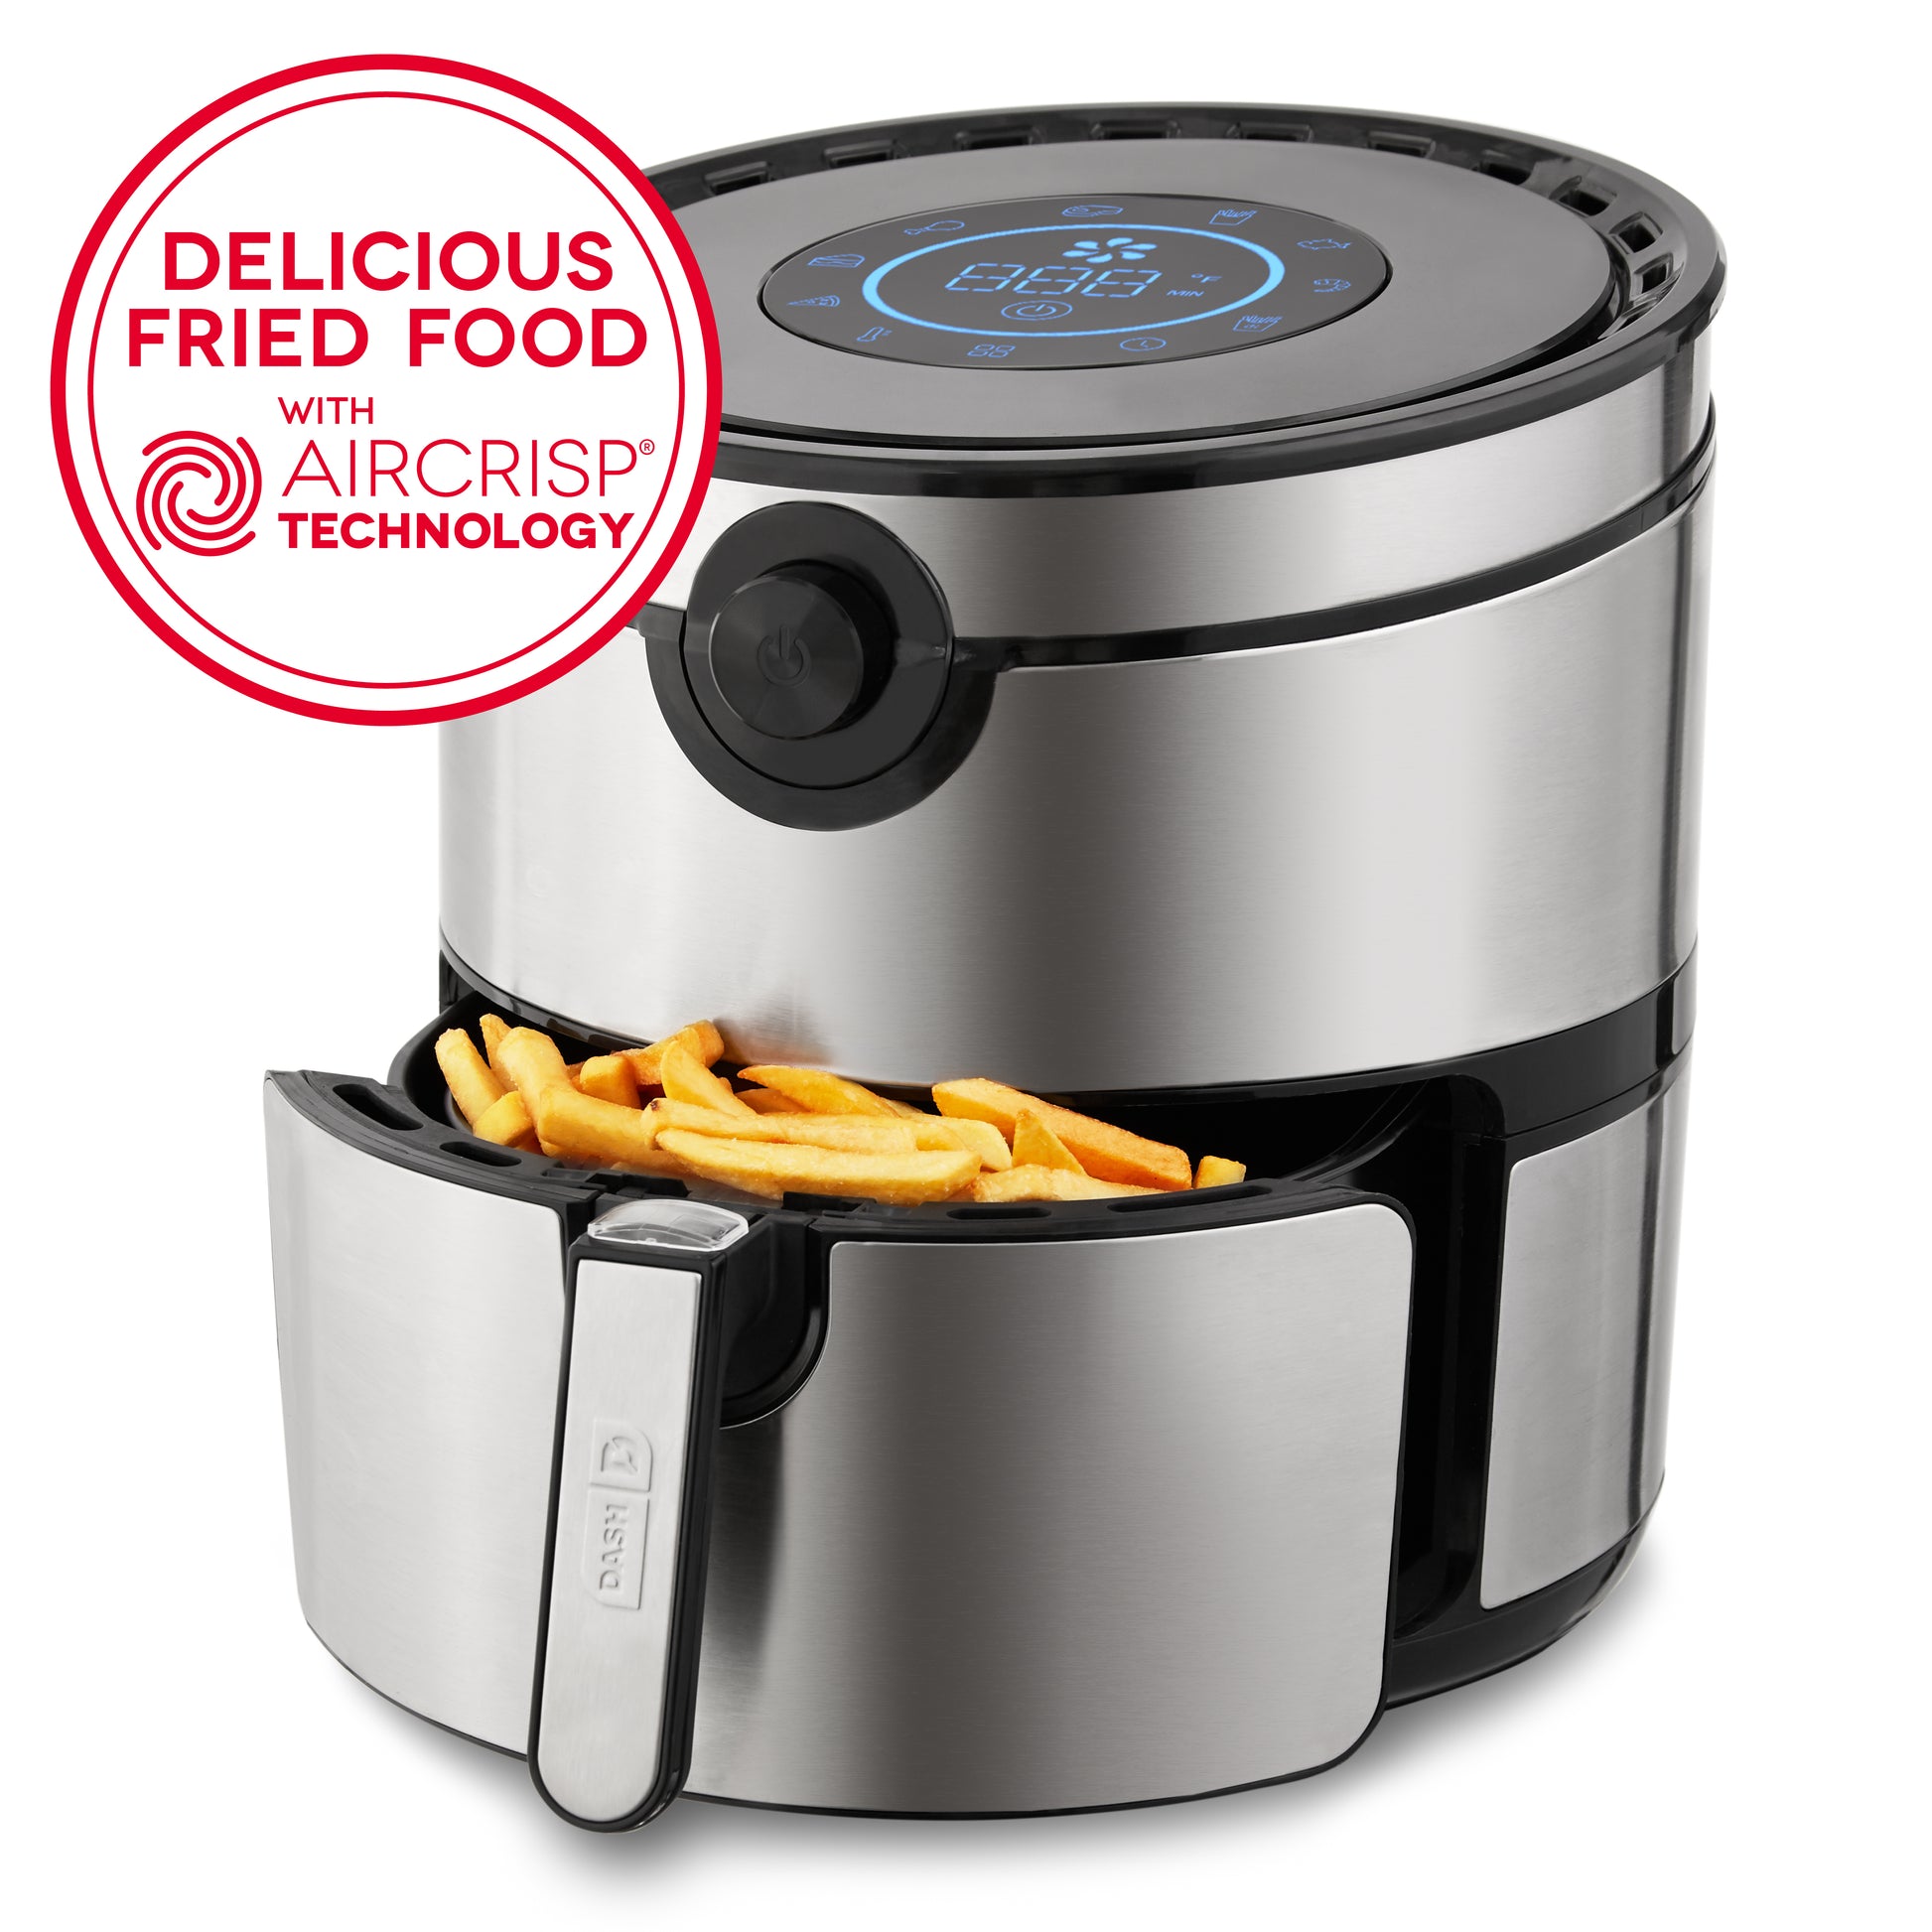 Where to snap up a digital 6L air fryer on sale for just £50 - OK! Magazine